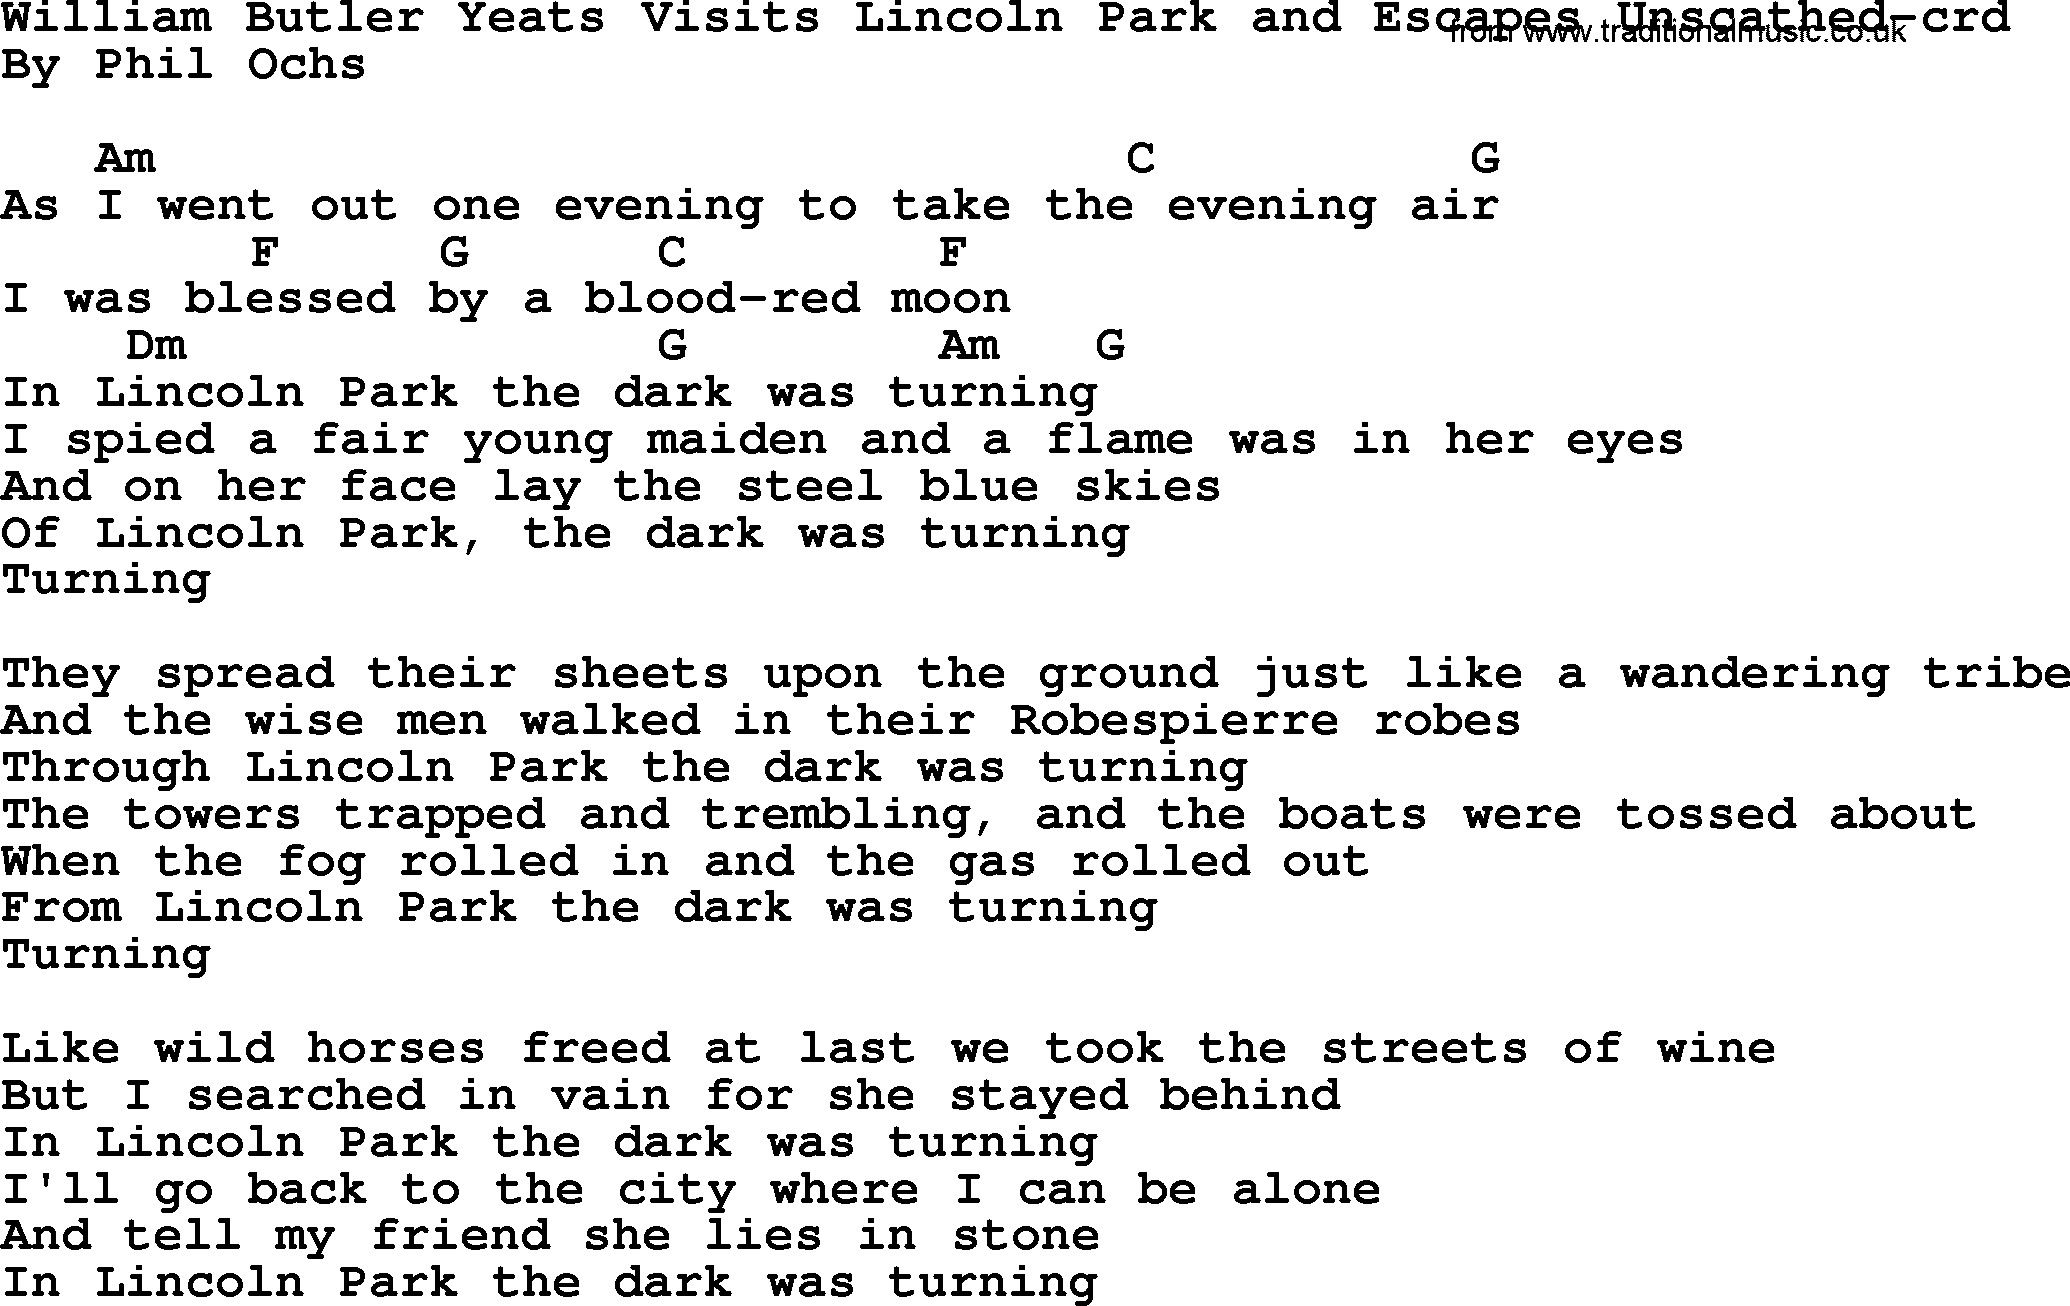 Phil Ochs song William Butler Yeats Visits Lincoln Park And Escapes Unscathed- by Phil Ochs, lyrics and chords